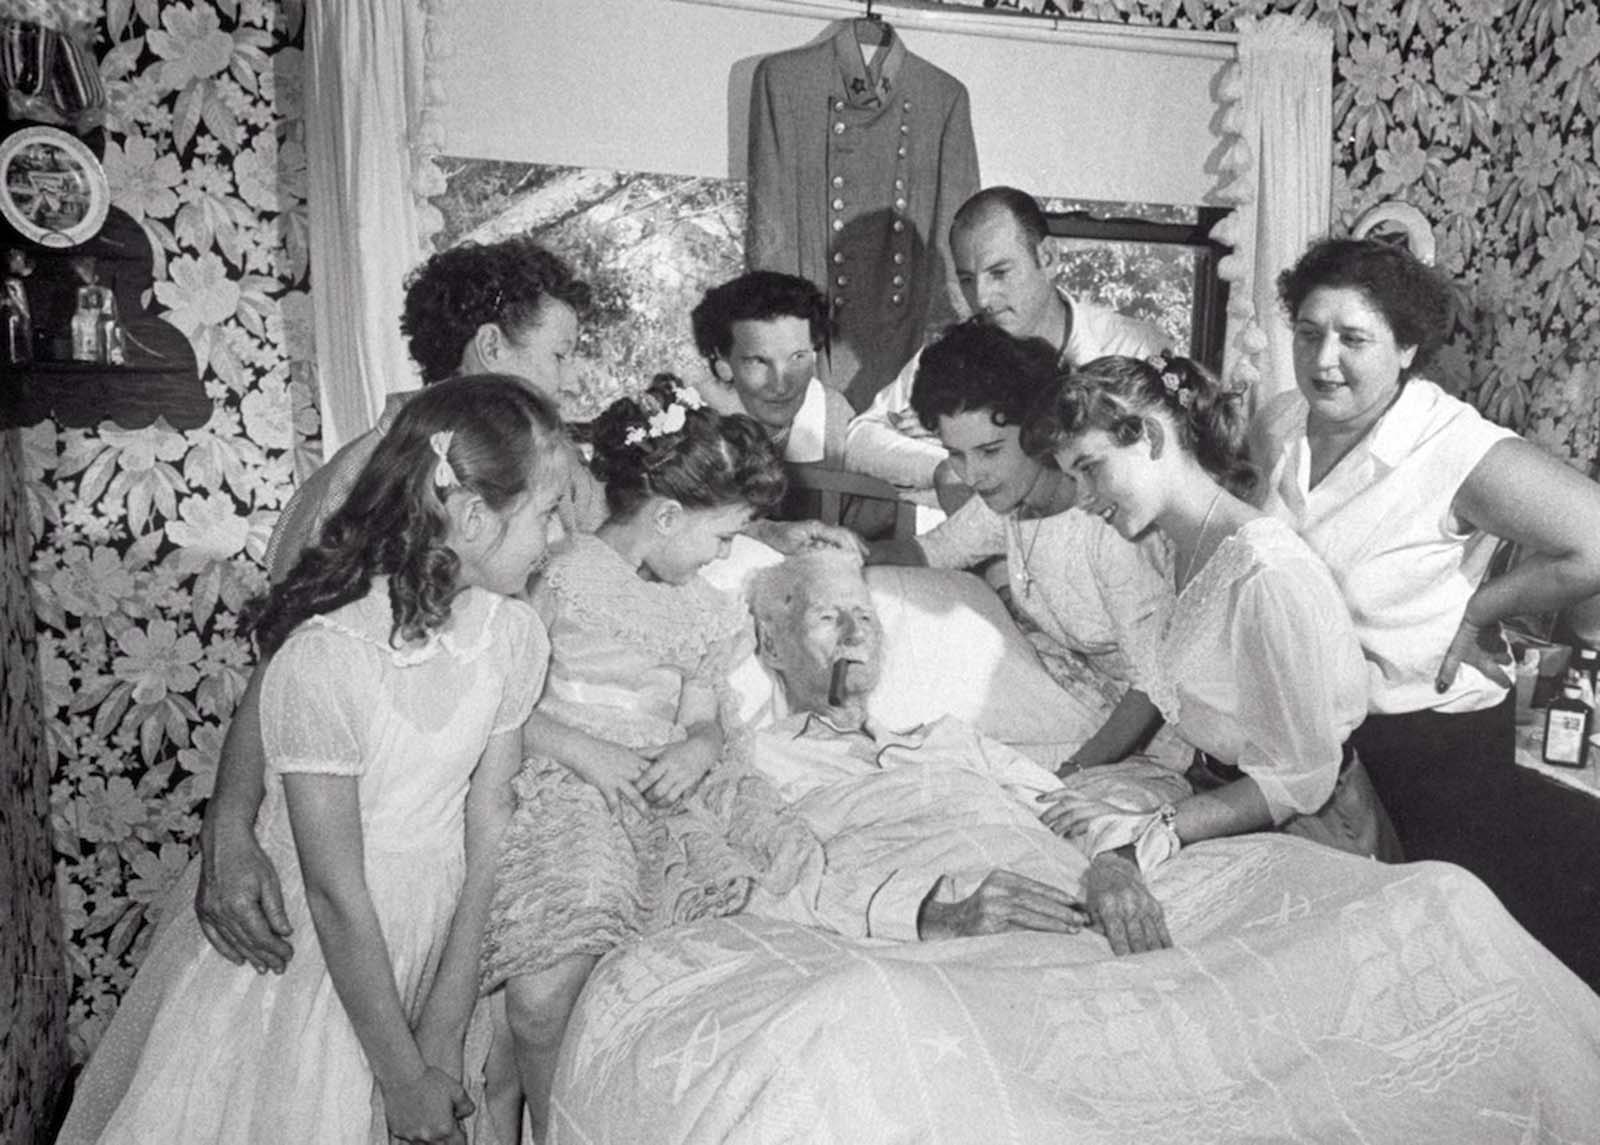 Walter Williams lying in bed with cigar, surrounded by family and friends. 1959.